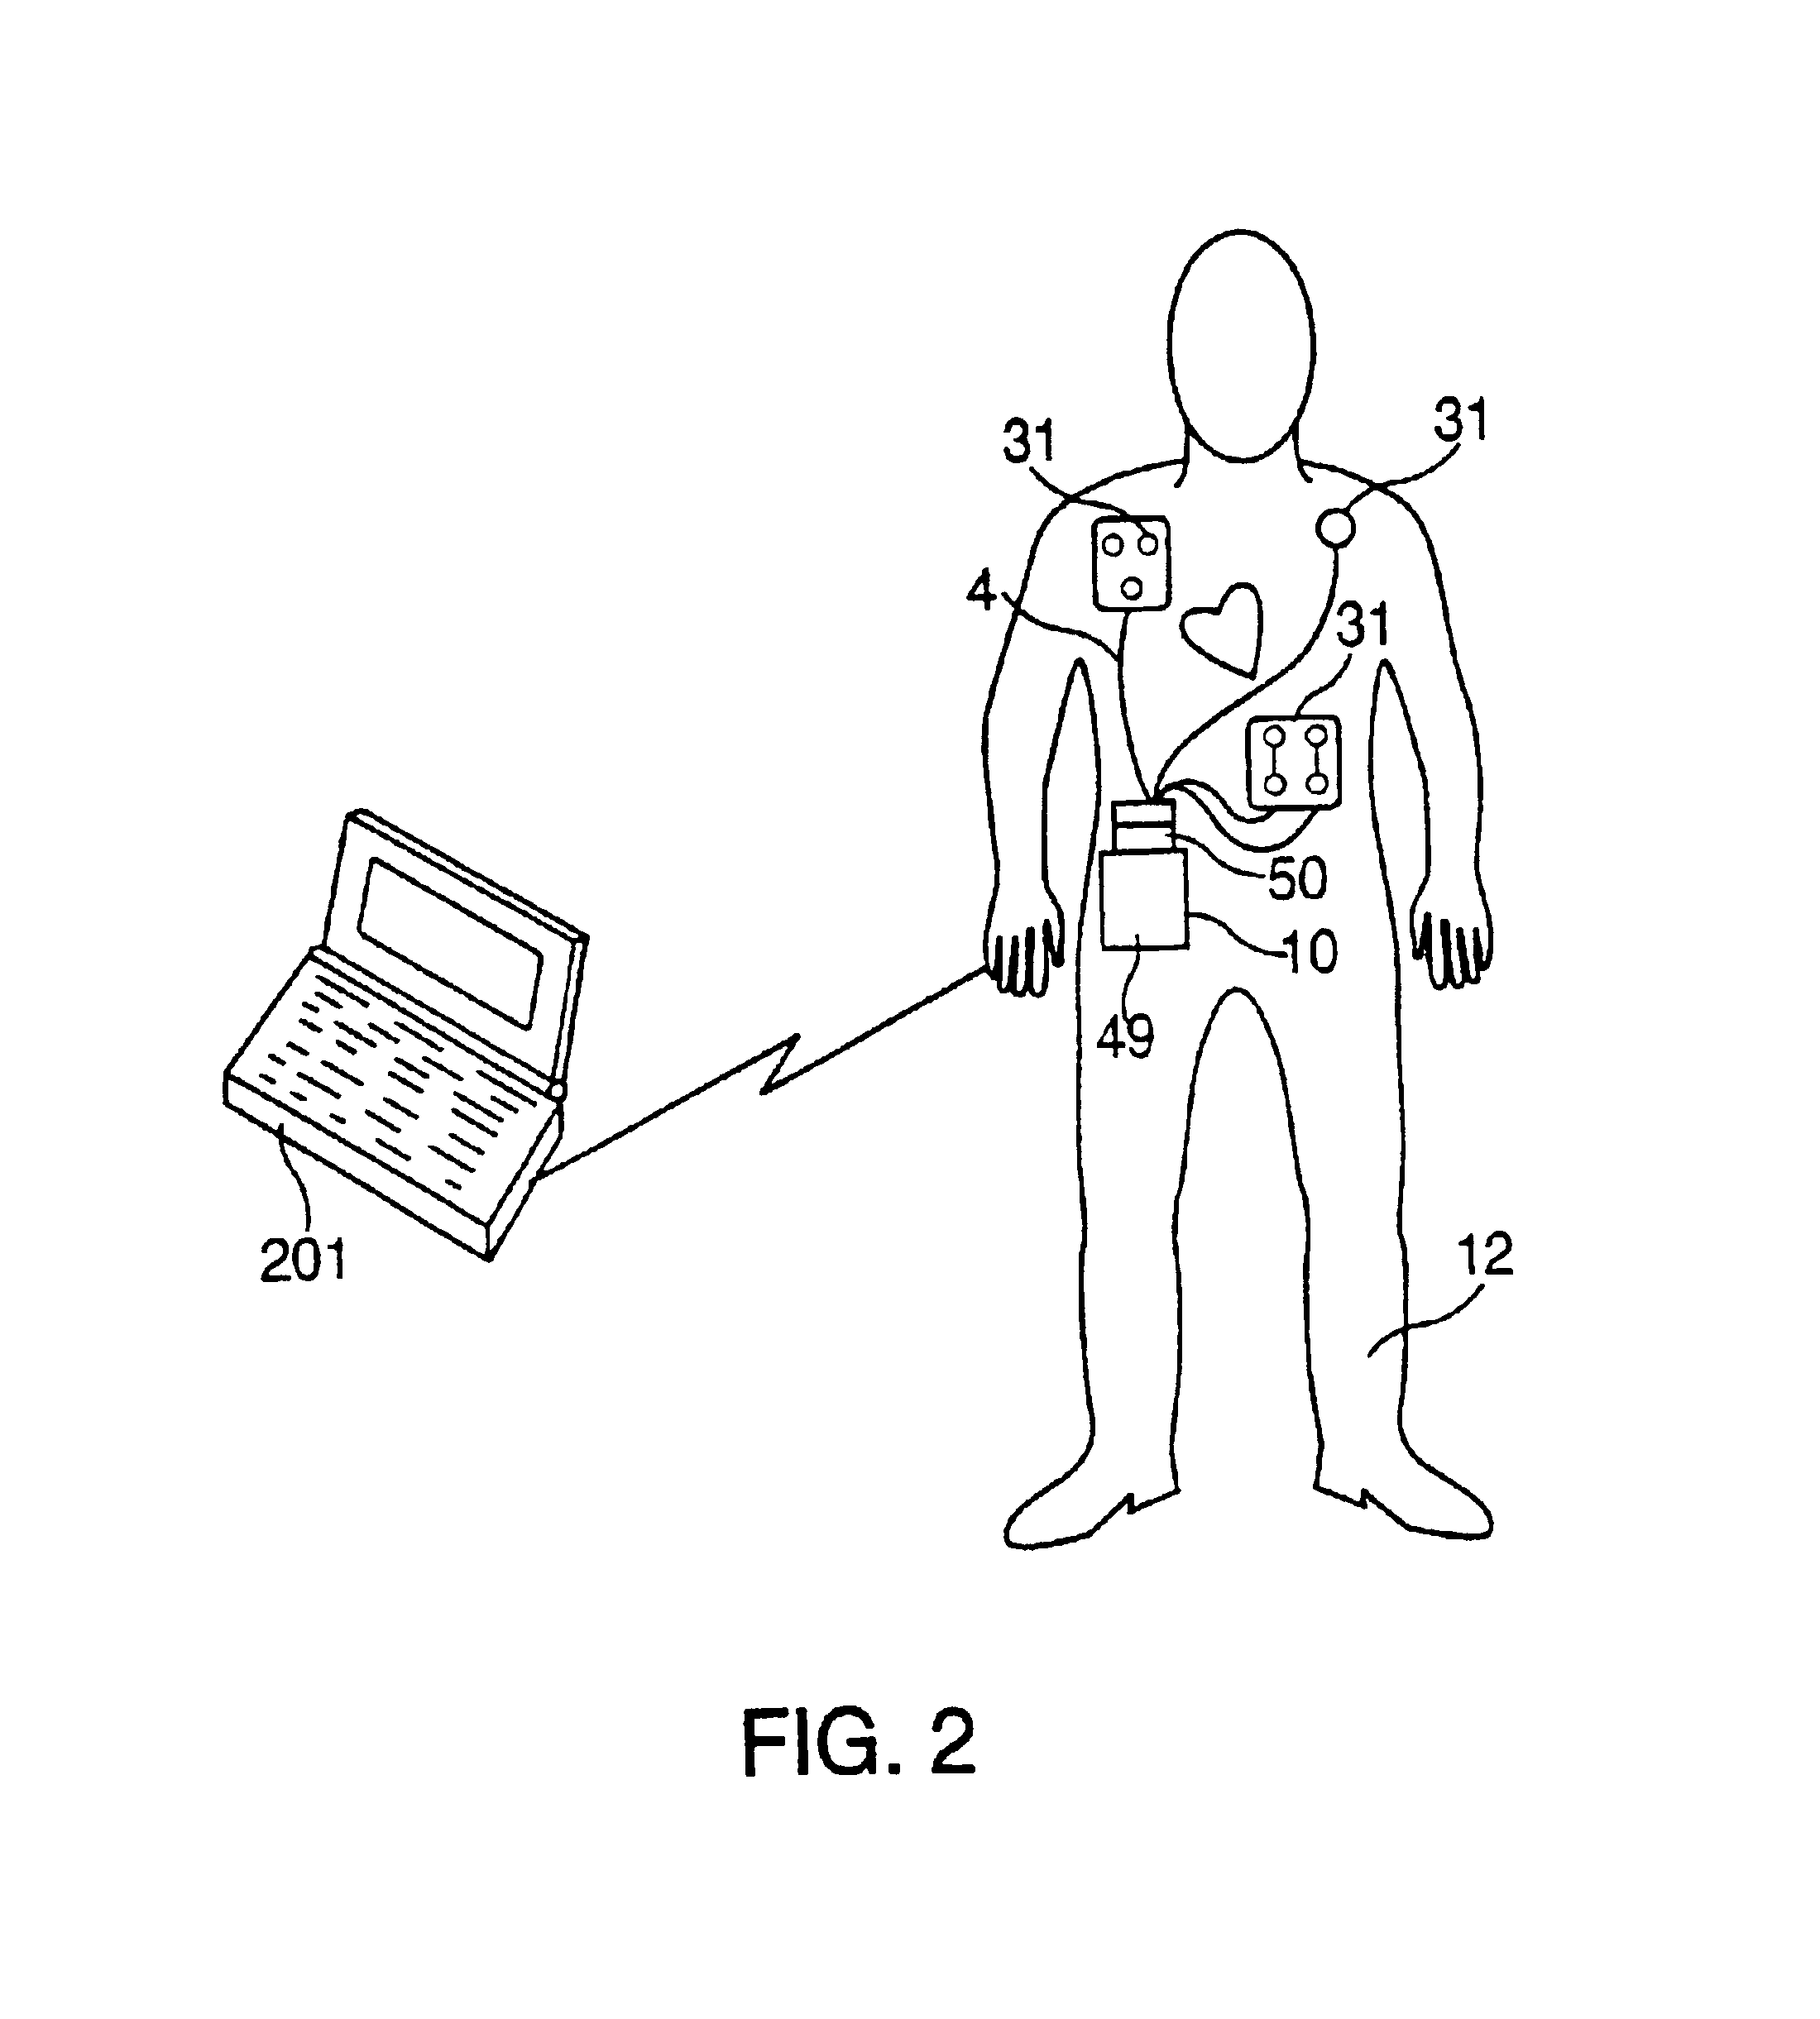 Method of utilizing an external defibrillator by replacing its electrodes